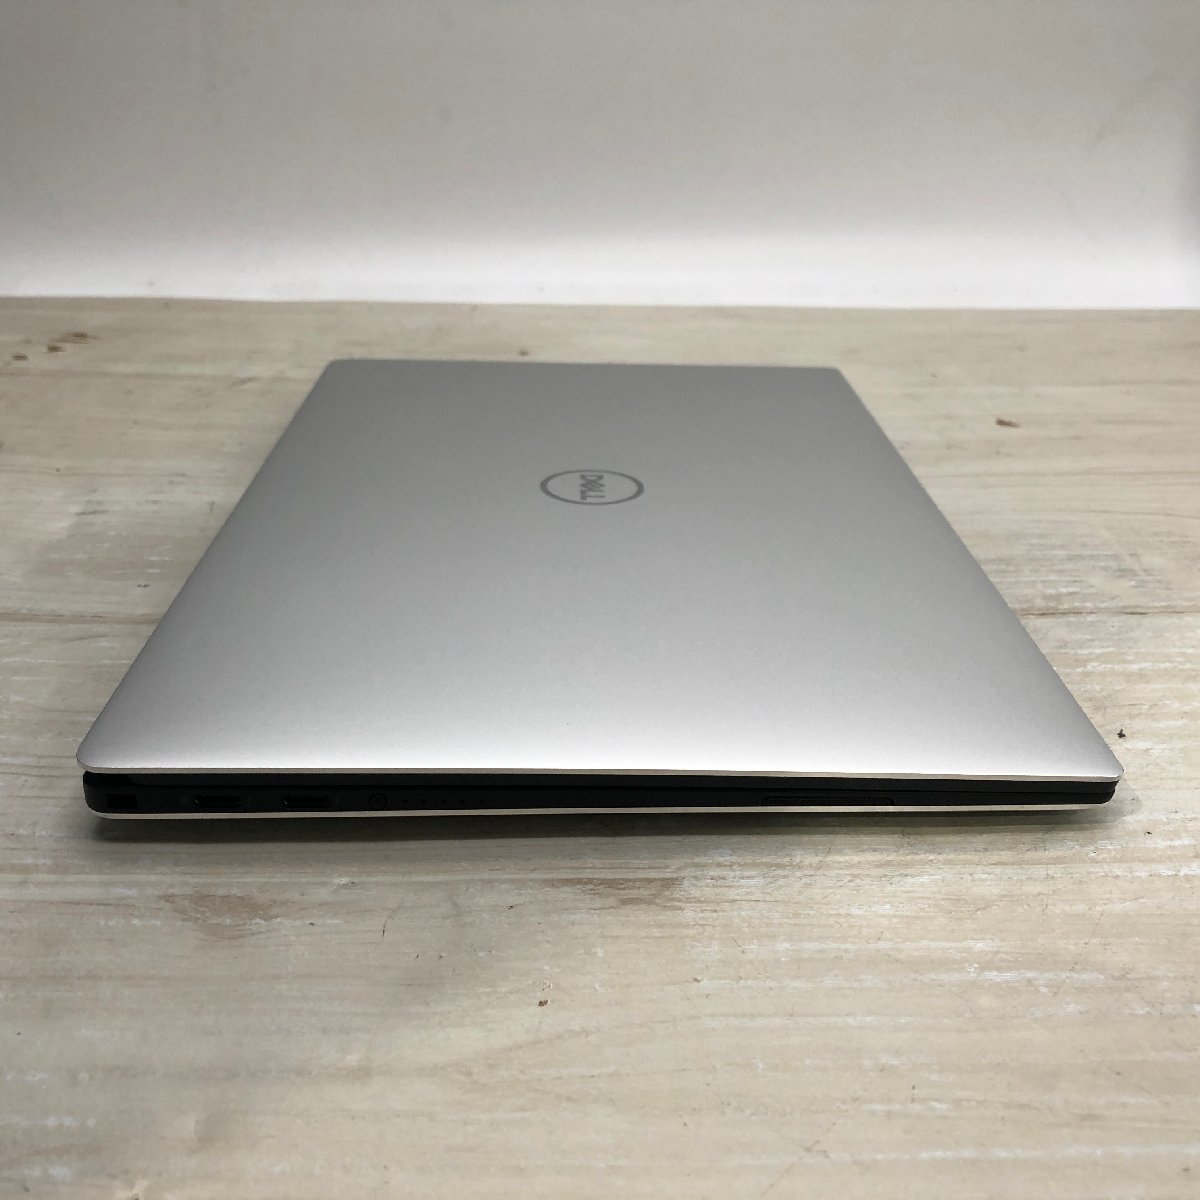 DELL XPS 13 9380 Core i7 8665U 1.90GHz/16GB/なし 〔1102N41〕_画像5